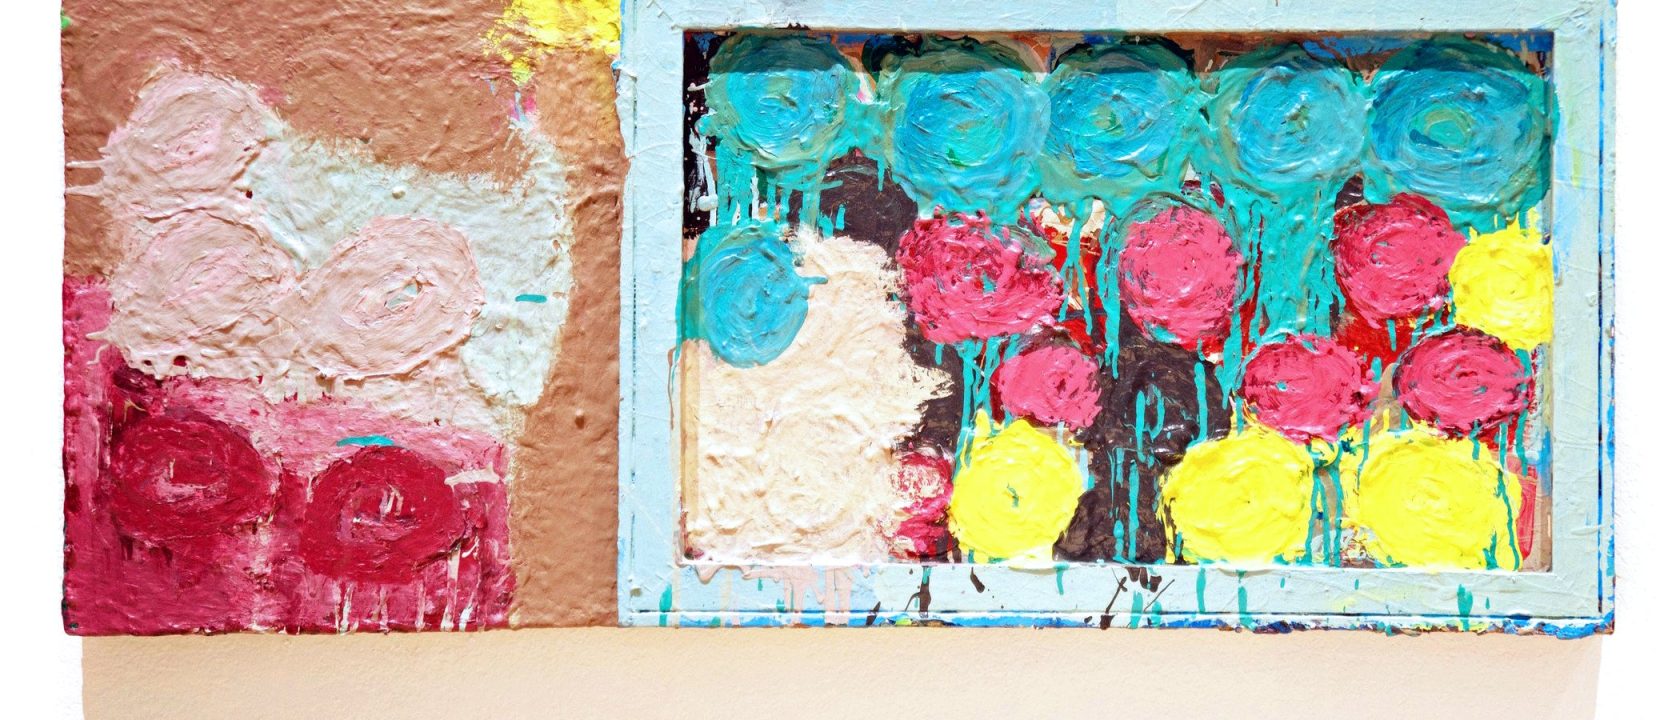 an acrylic painting on two joined canvases. a square on the left features thickly layered paint in reds, pinks, creamy white and a dash of yellow in the upper right corner. A rectangle with a light blue wooden frame attached features a similar pattern of round shapes, thickly painted, but in bright and drippy blues, pinks, and yellows, with a patch of the same creamy white in the lower left corner.